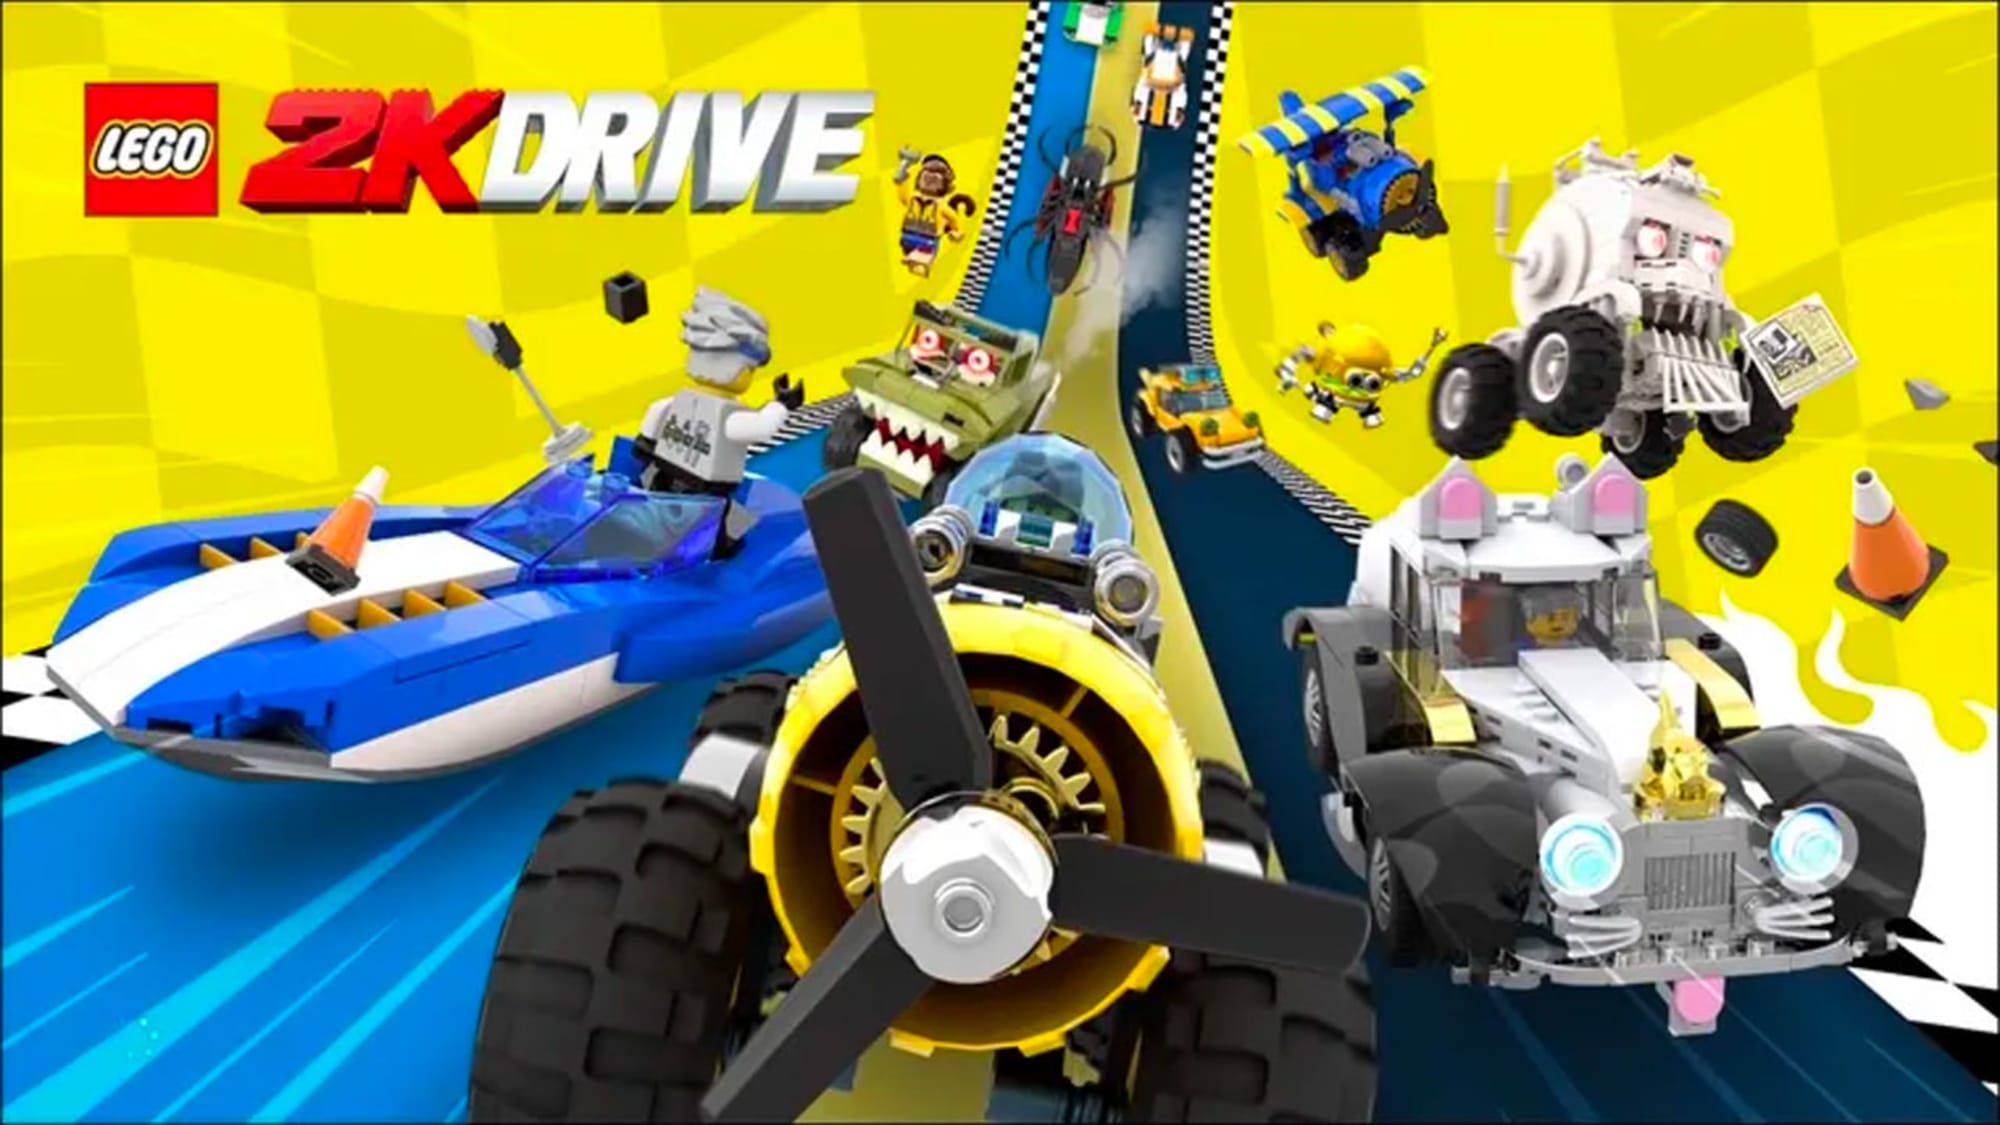 Lego 2K Drive: Every collectible located in Turbo Acres